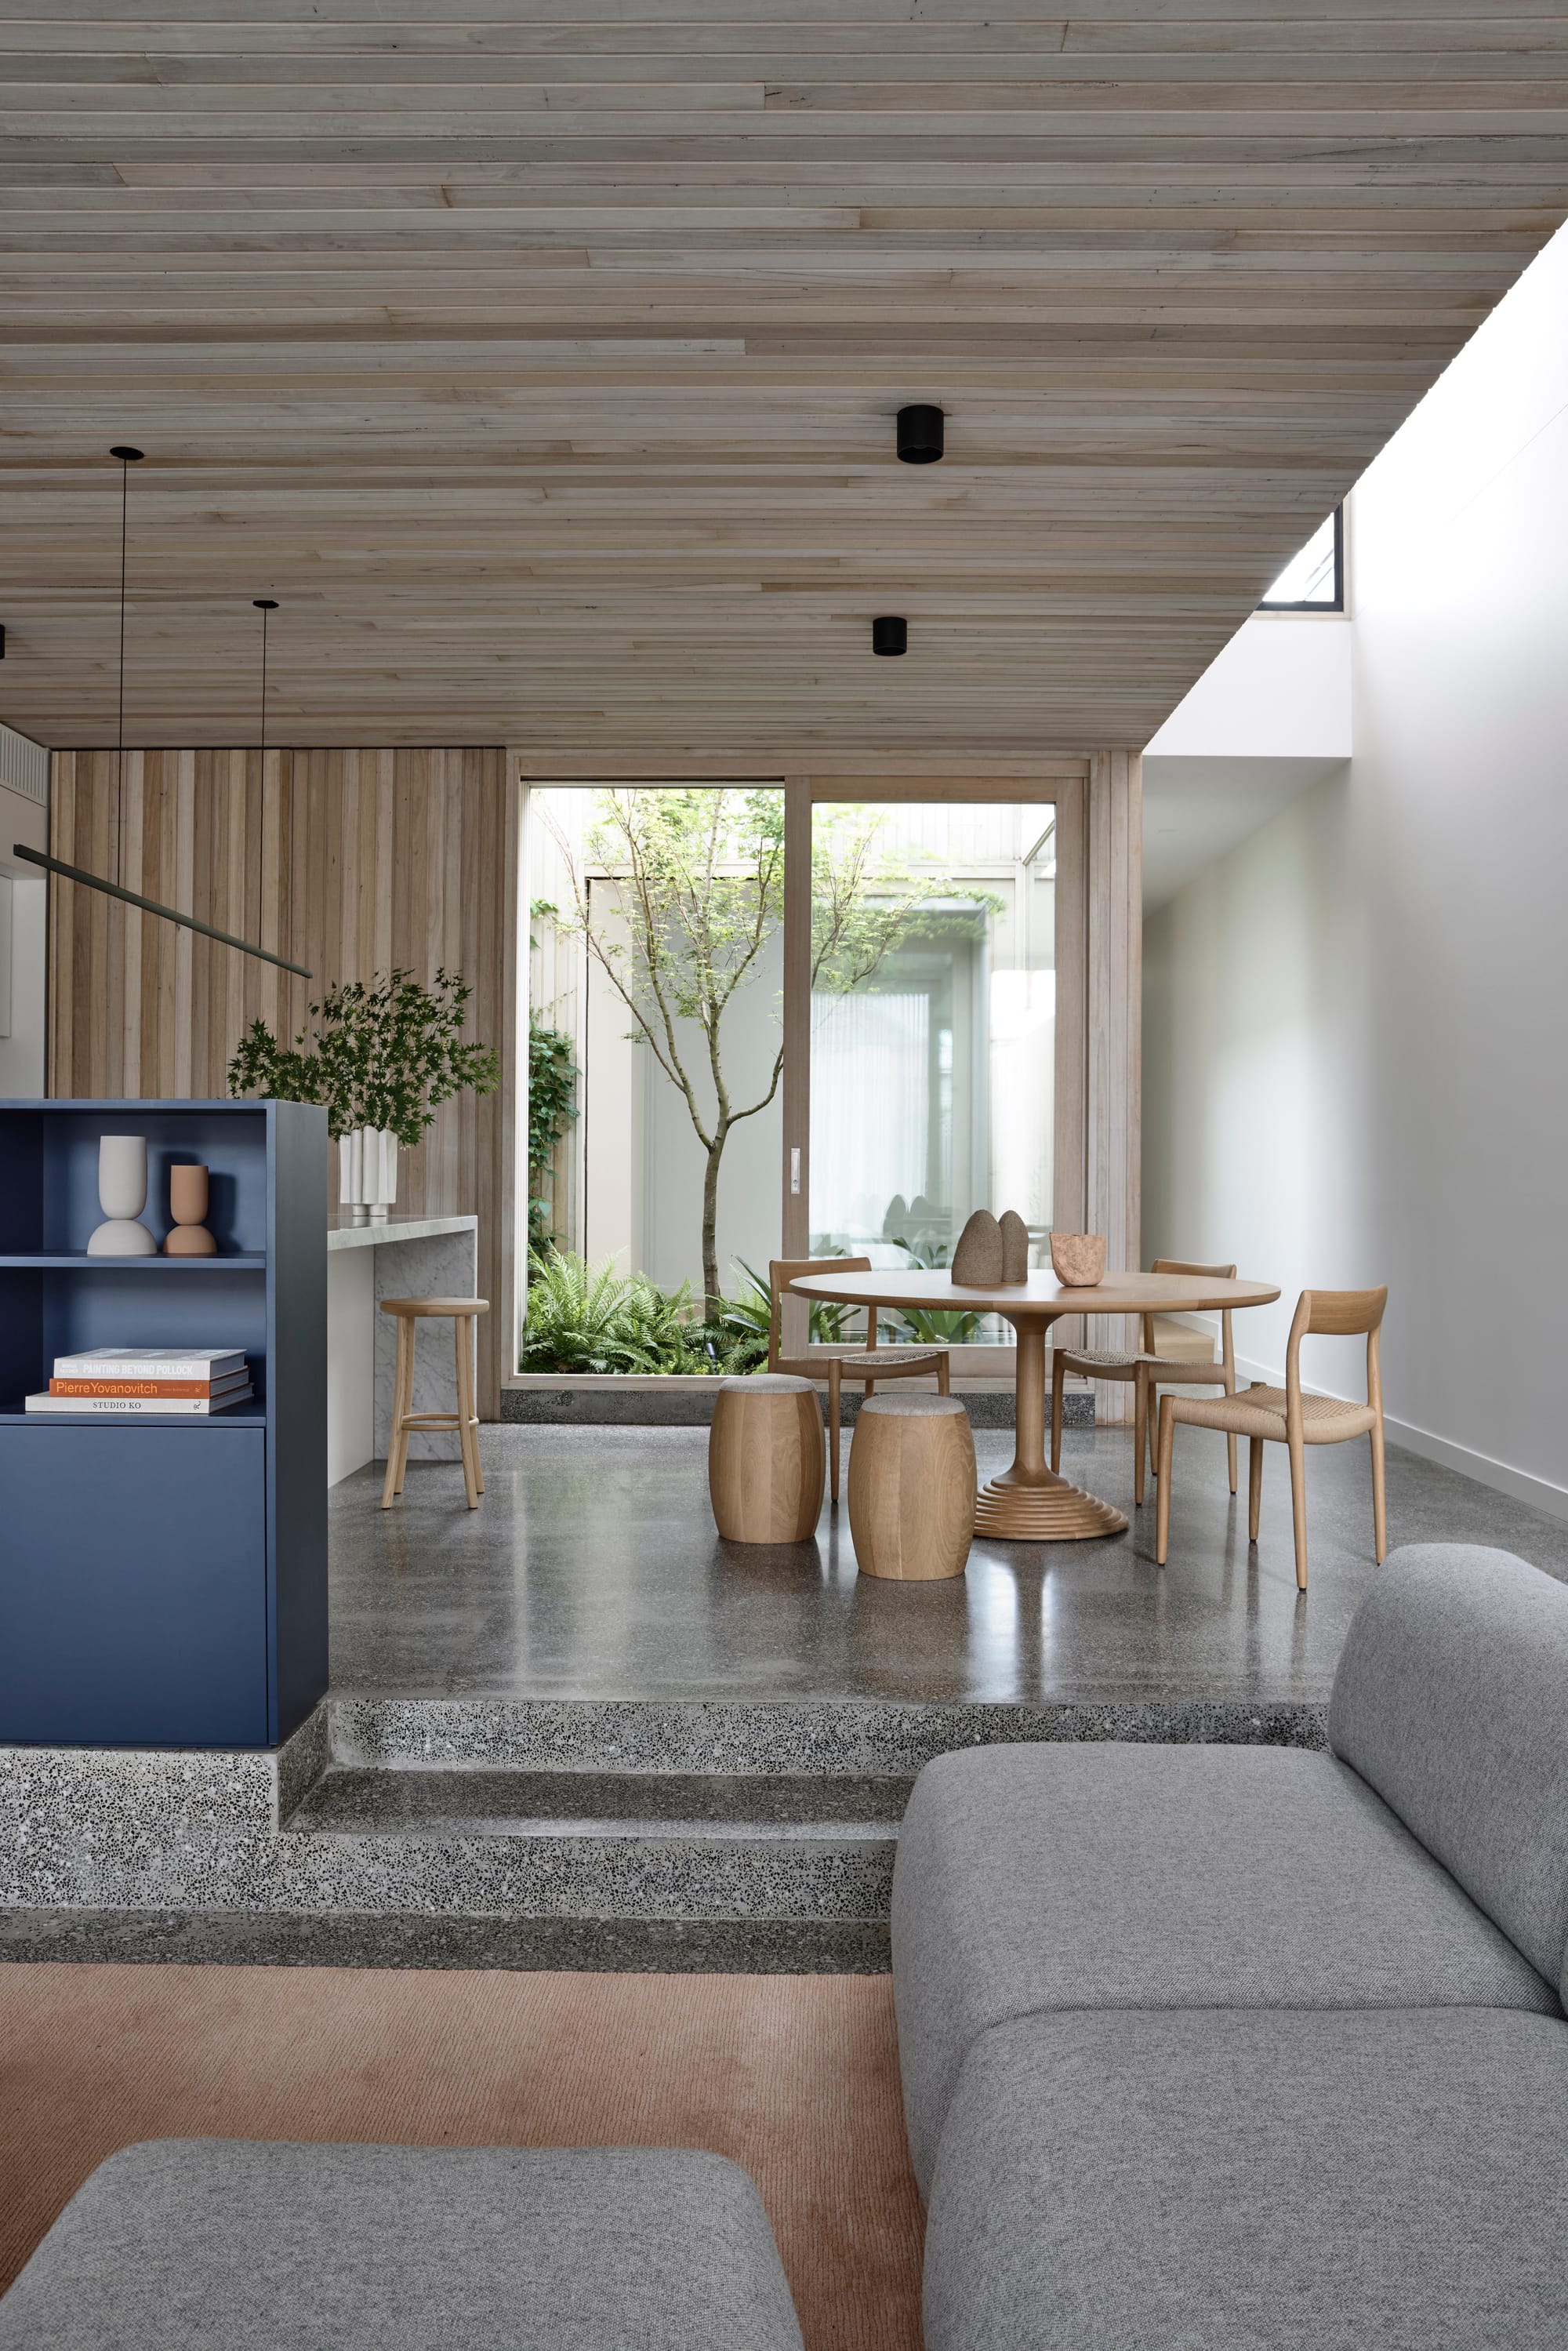 Silvertop House by Tom Robertson Photography. Photography by Derek Swalwell. Polished and speckled concrete raised kitchen and dining area leading away from sunken lounge with grey couch. Round timber dining table. 